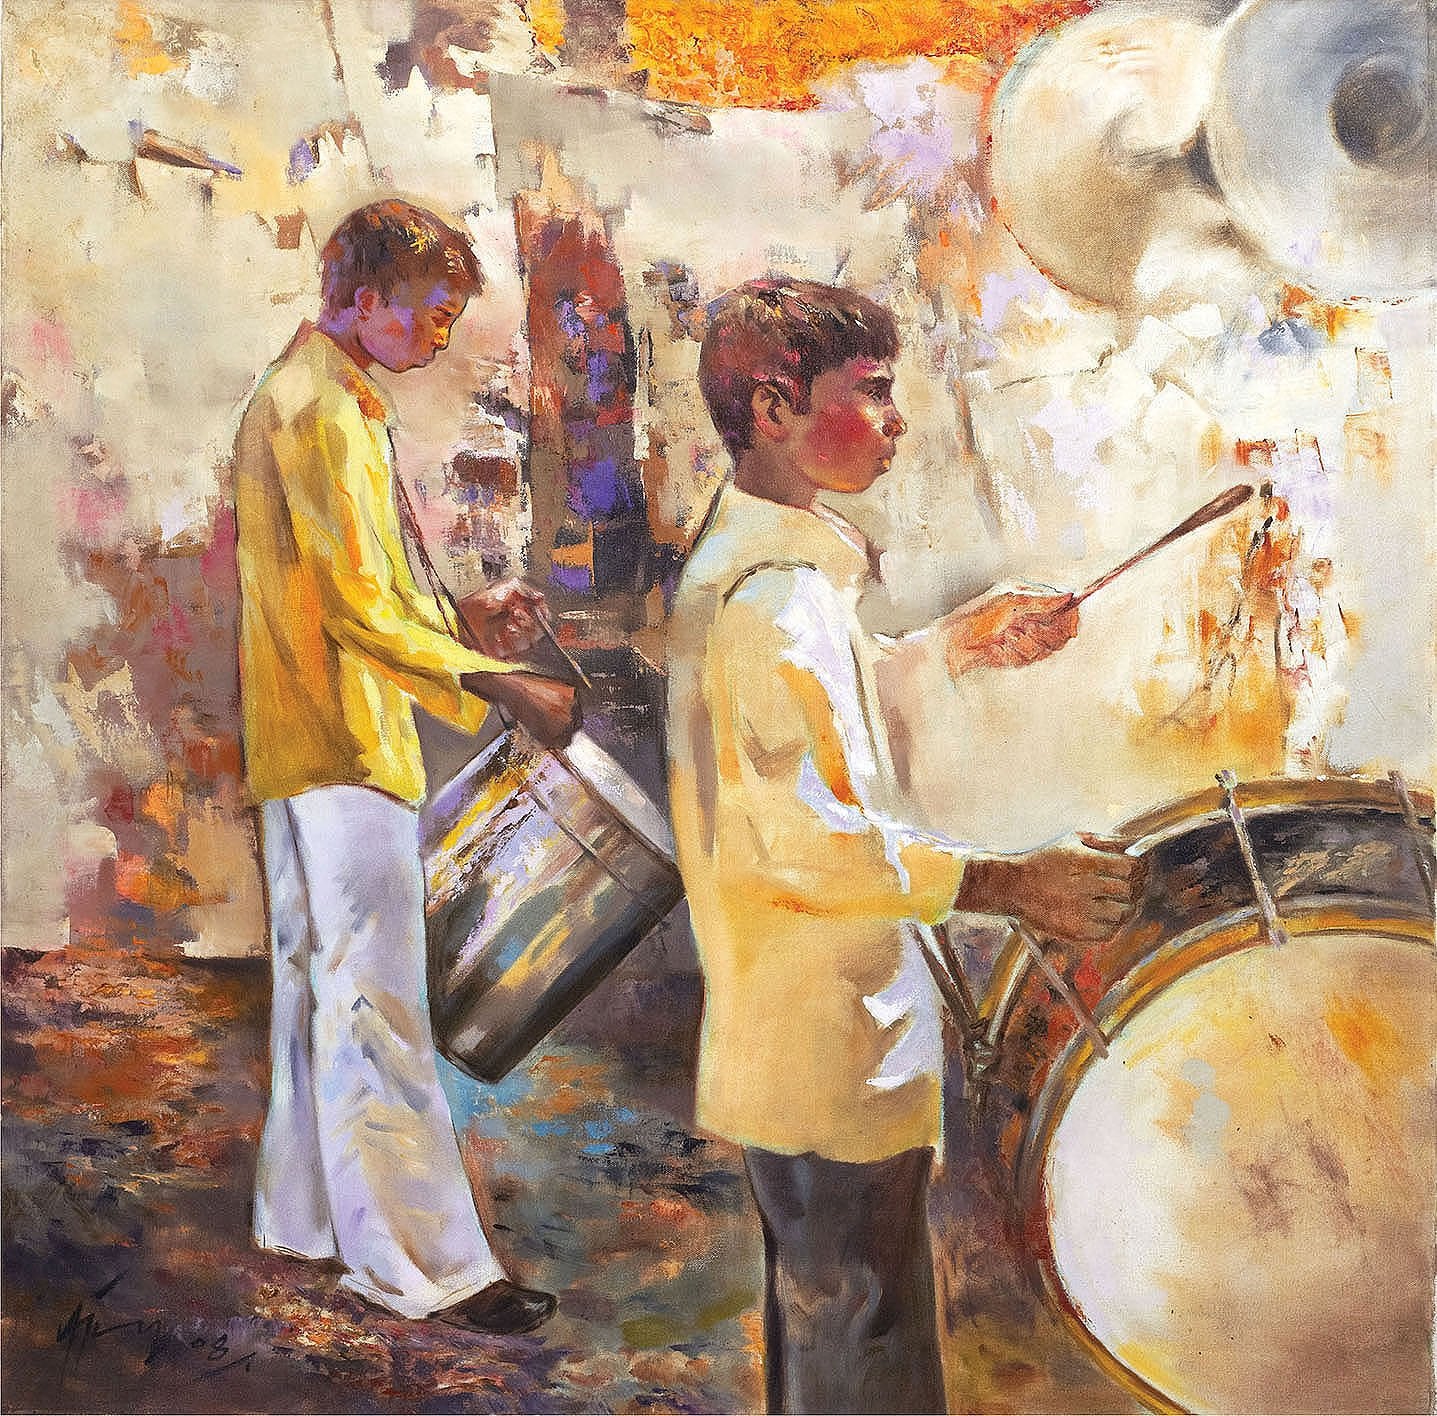 Drummer 12|Ajay Deshpande- Oil on Canvas, 2008, 36 x 36 inches